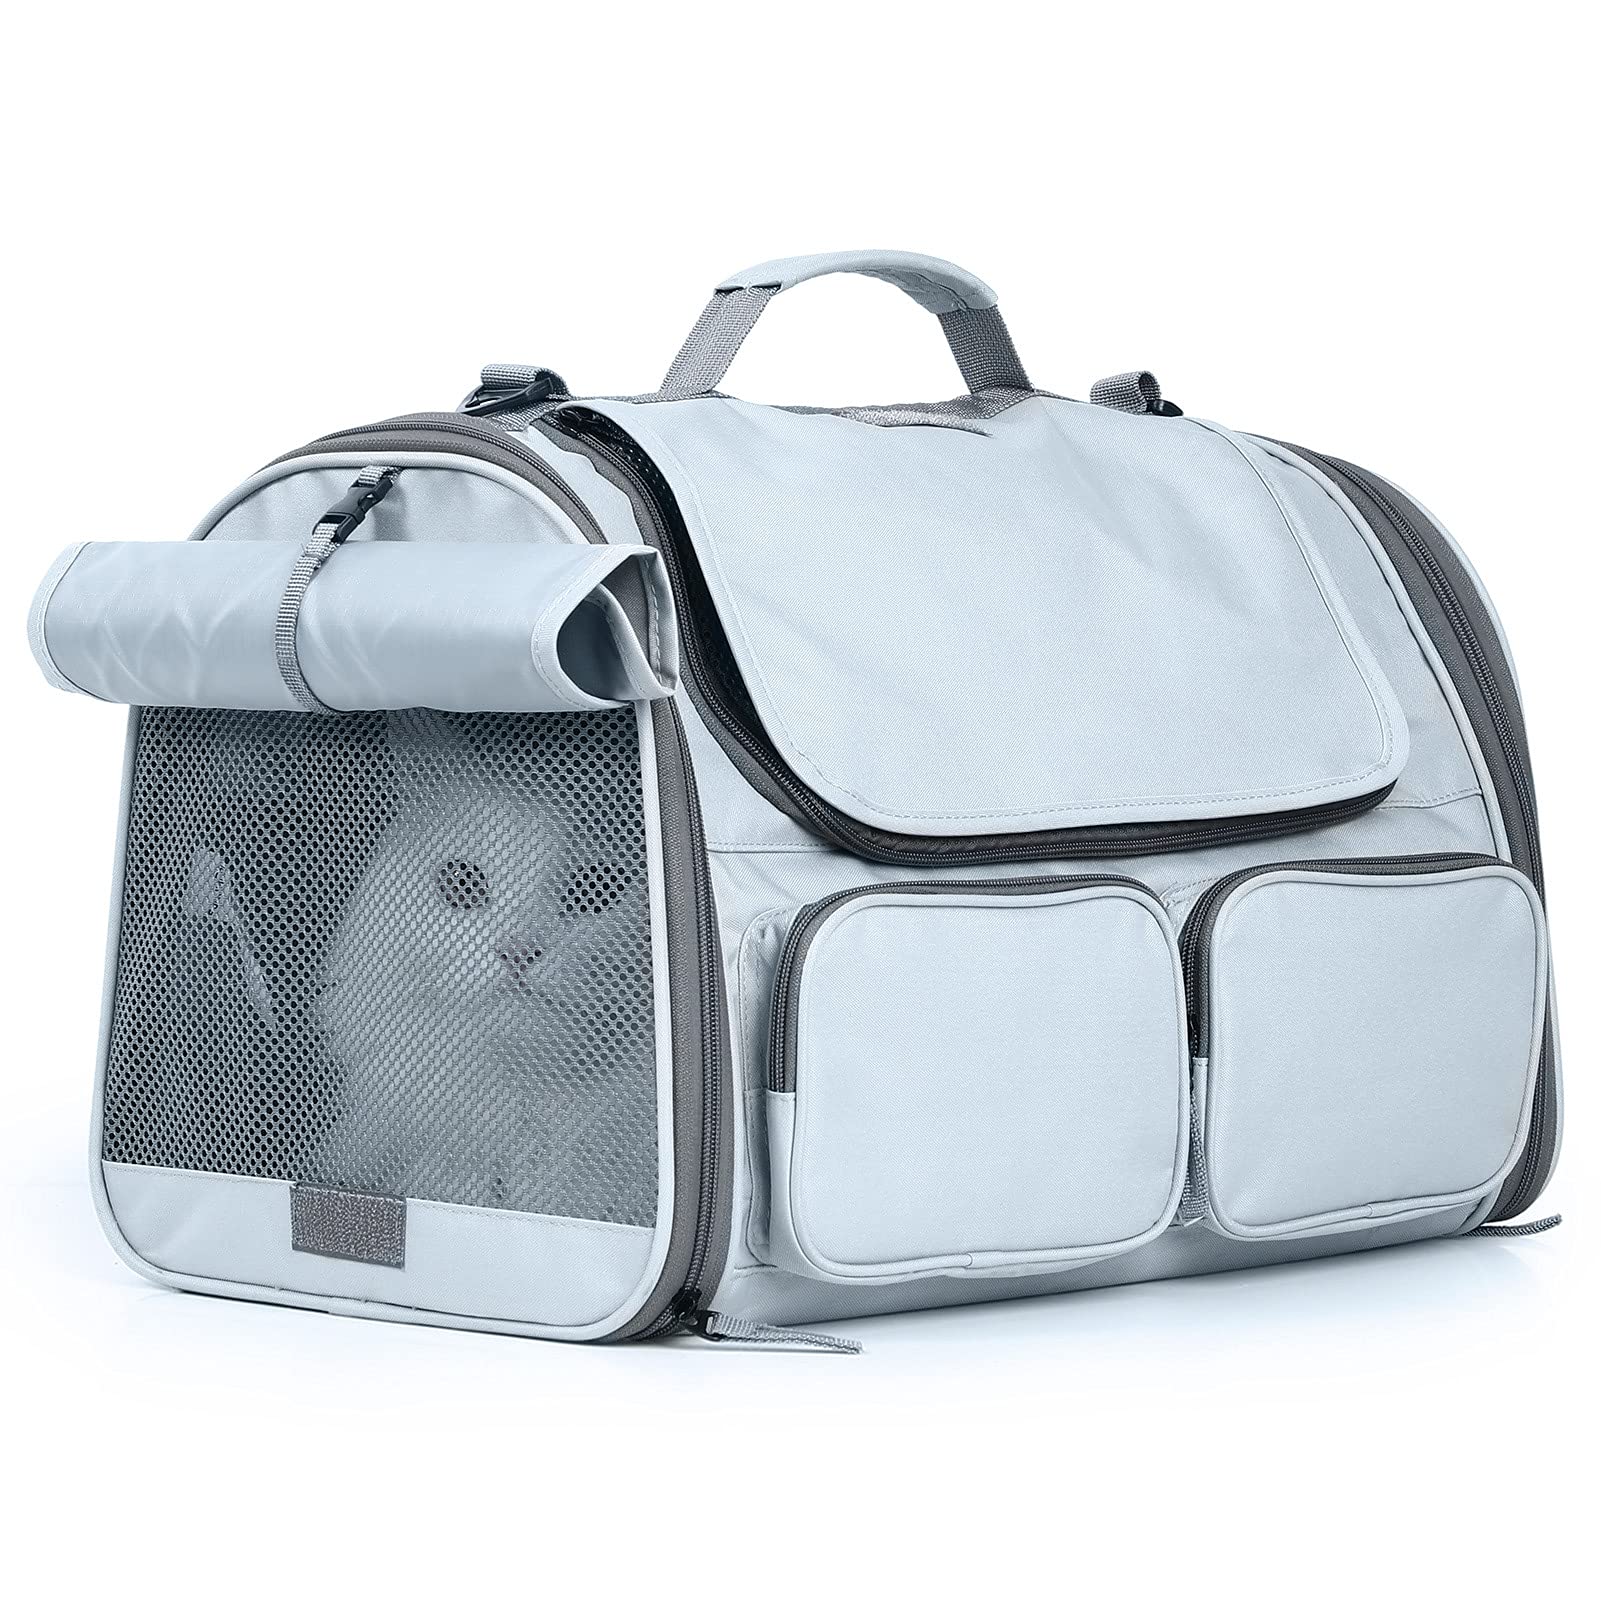 FUKUMARU Cat Carrier Airline Approved Soft Sided Dog Carrier Collapsible Cat Travel Bag Under 44 lb Small Medium Large Pet Carri